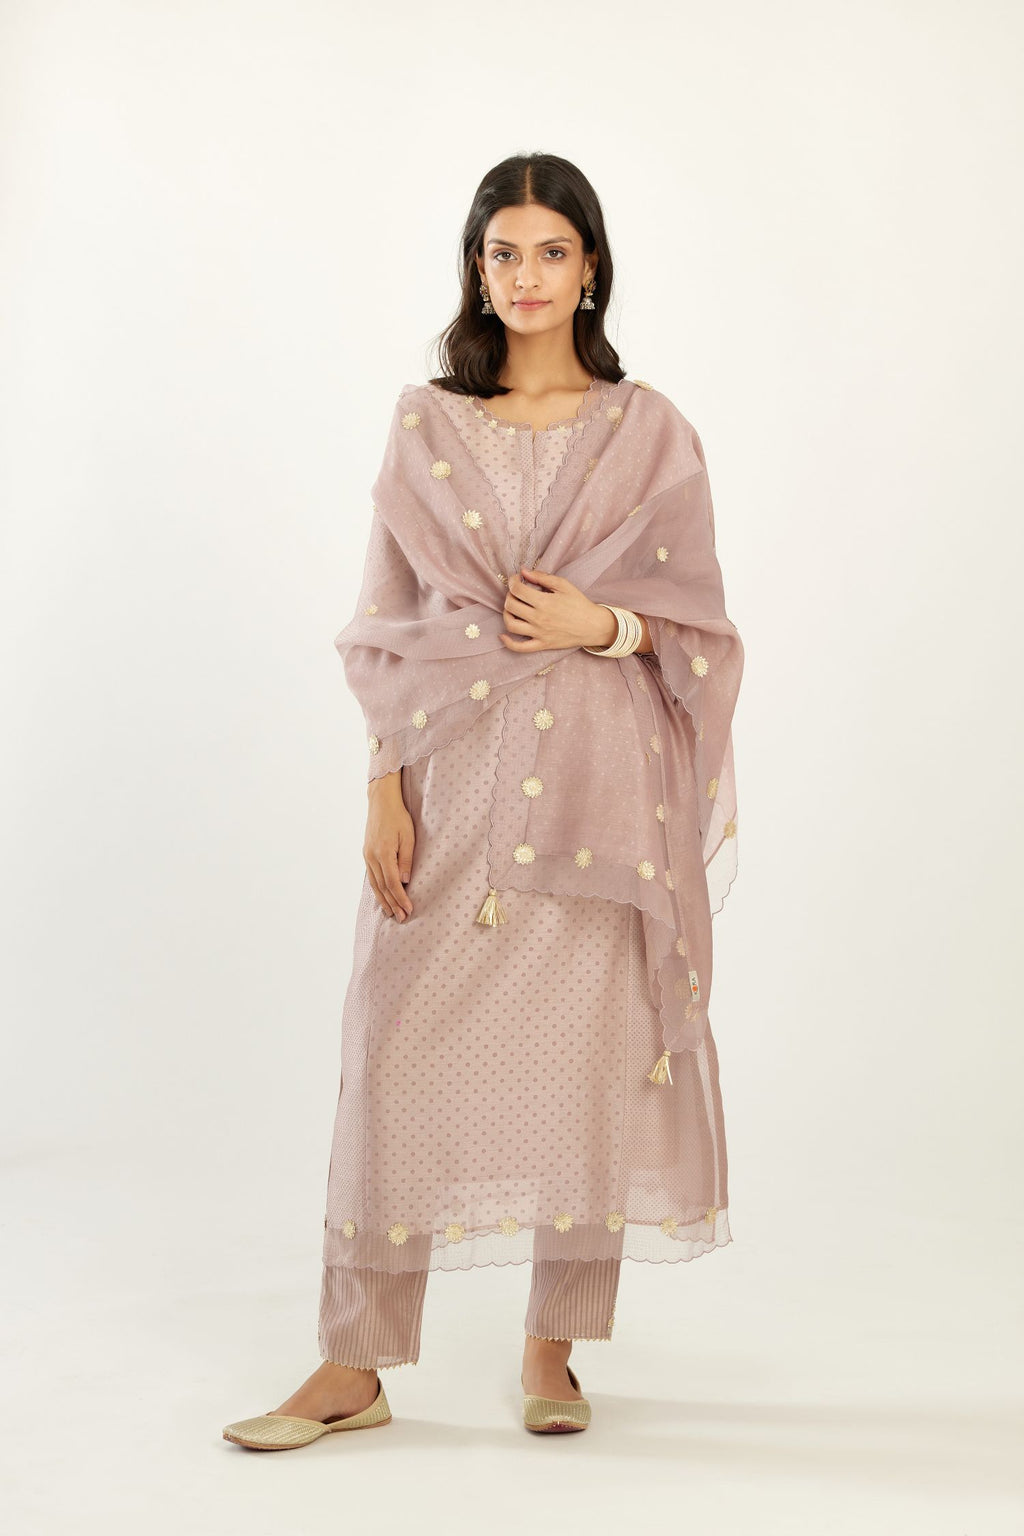 Lilac hand block printed silk chanderi kurta set with concealed button placket neckline, Highlighted with gota flower and scalloped organza at edges.